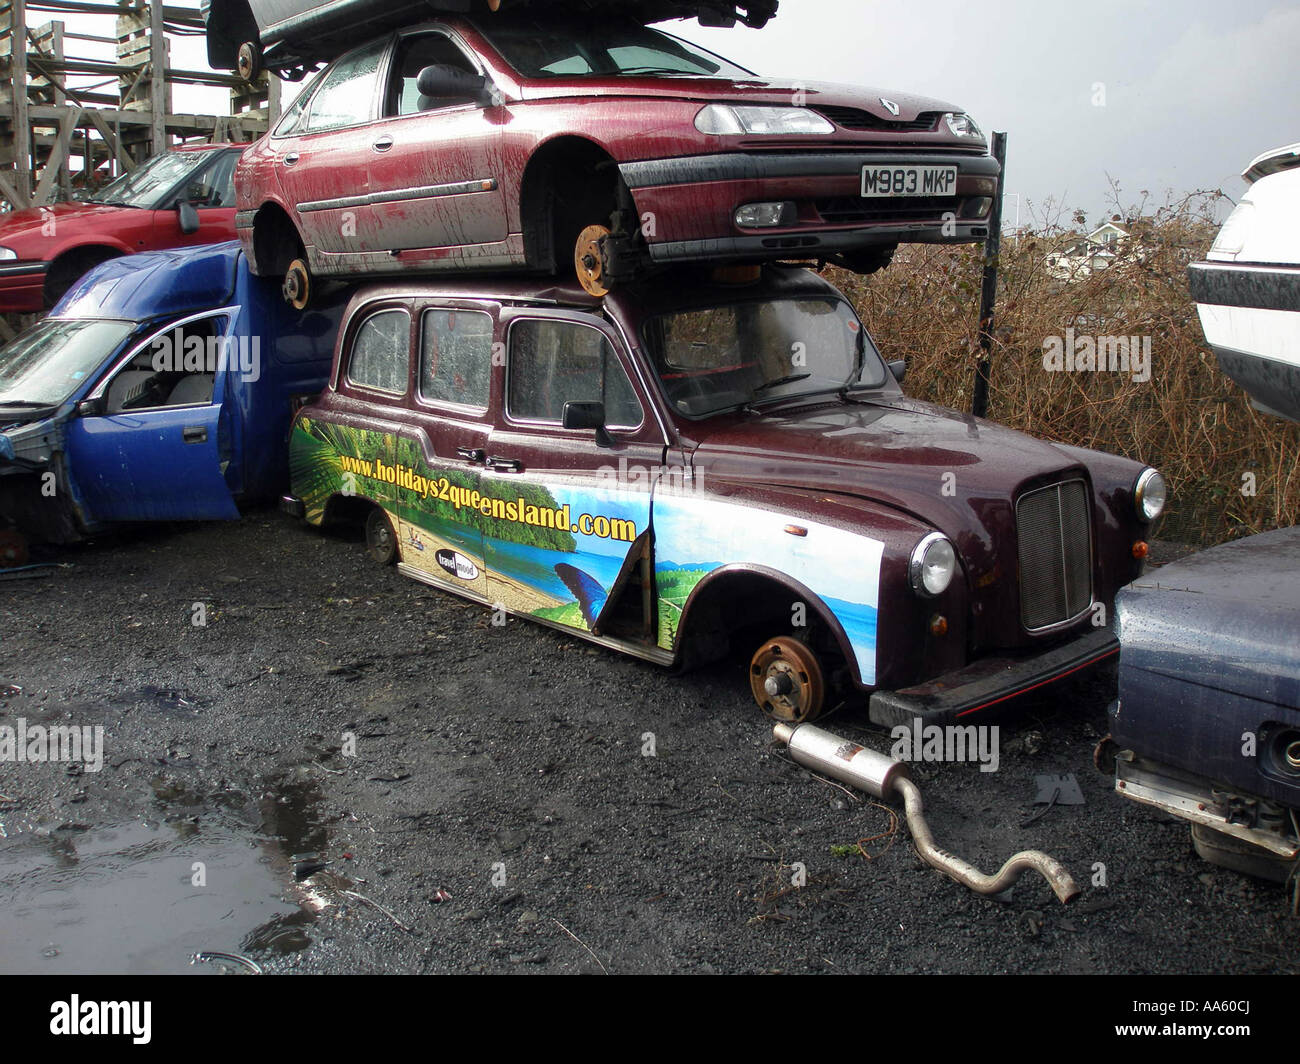 wrecked Renault Laguna on a London Taxi cab at the bottom of a stack of cars in a scrapyard Stock Photo